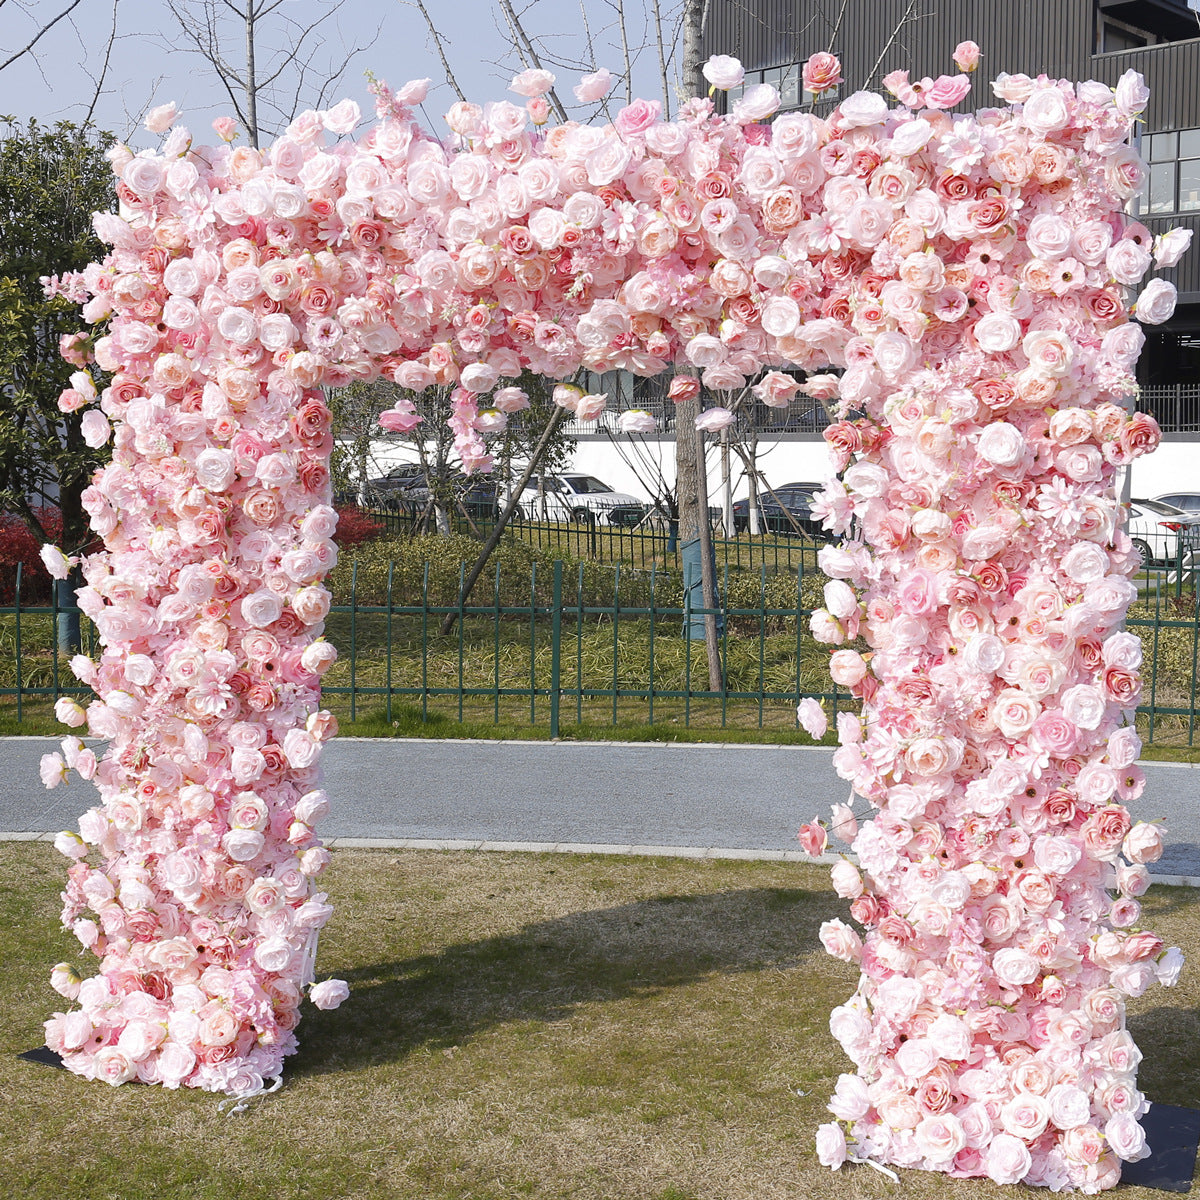 Handmade Artificial Cloth Curtain Pink Silk Flower Wall Arch Wedding Backdrop Decoration Outdoor Event Party Decor Props